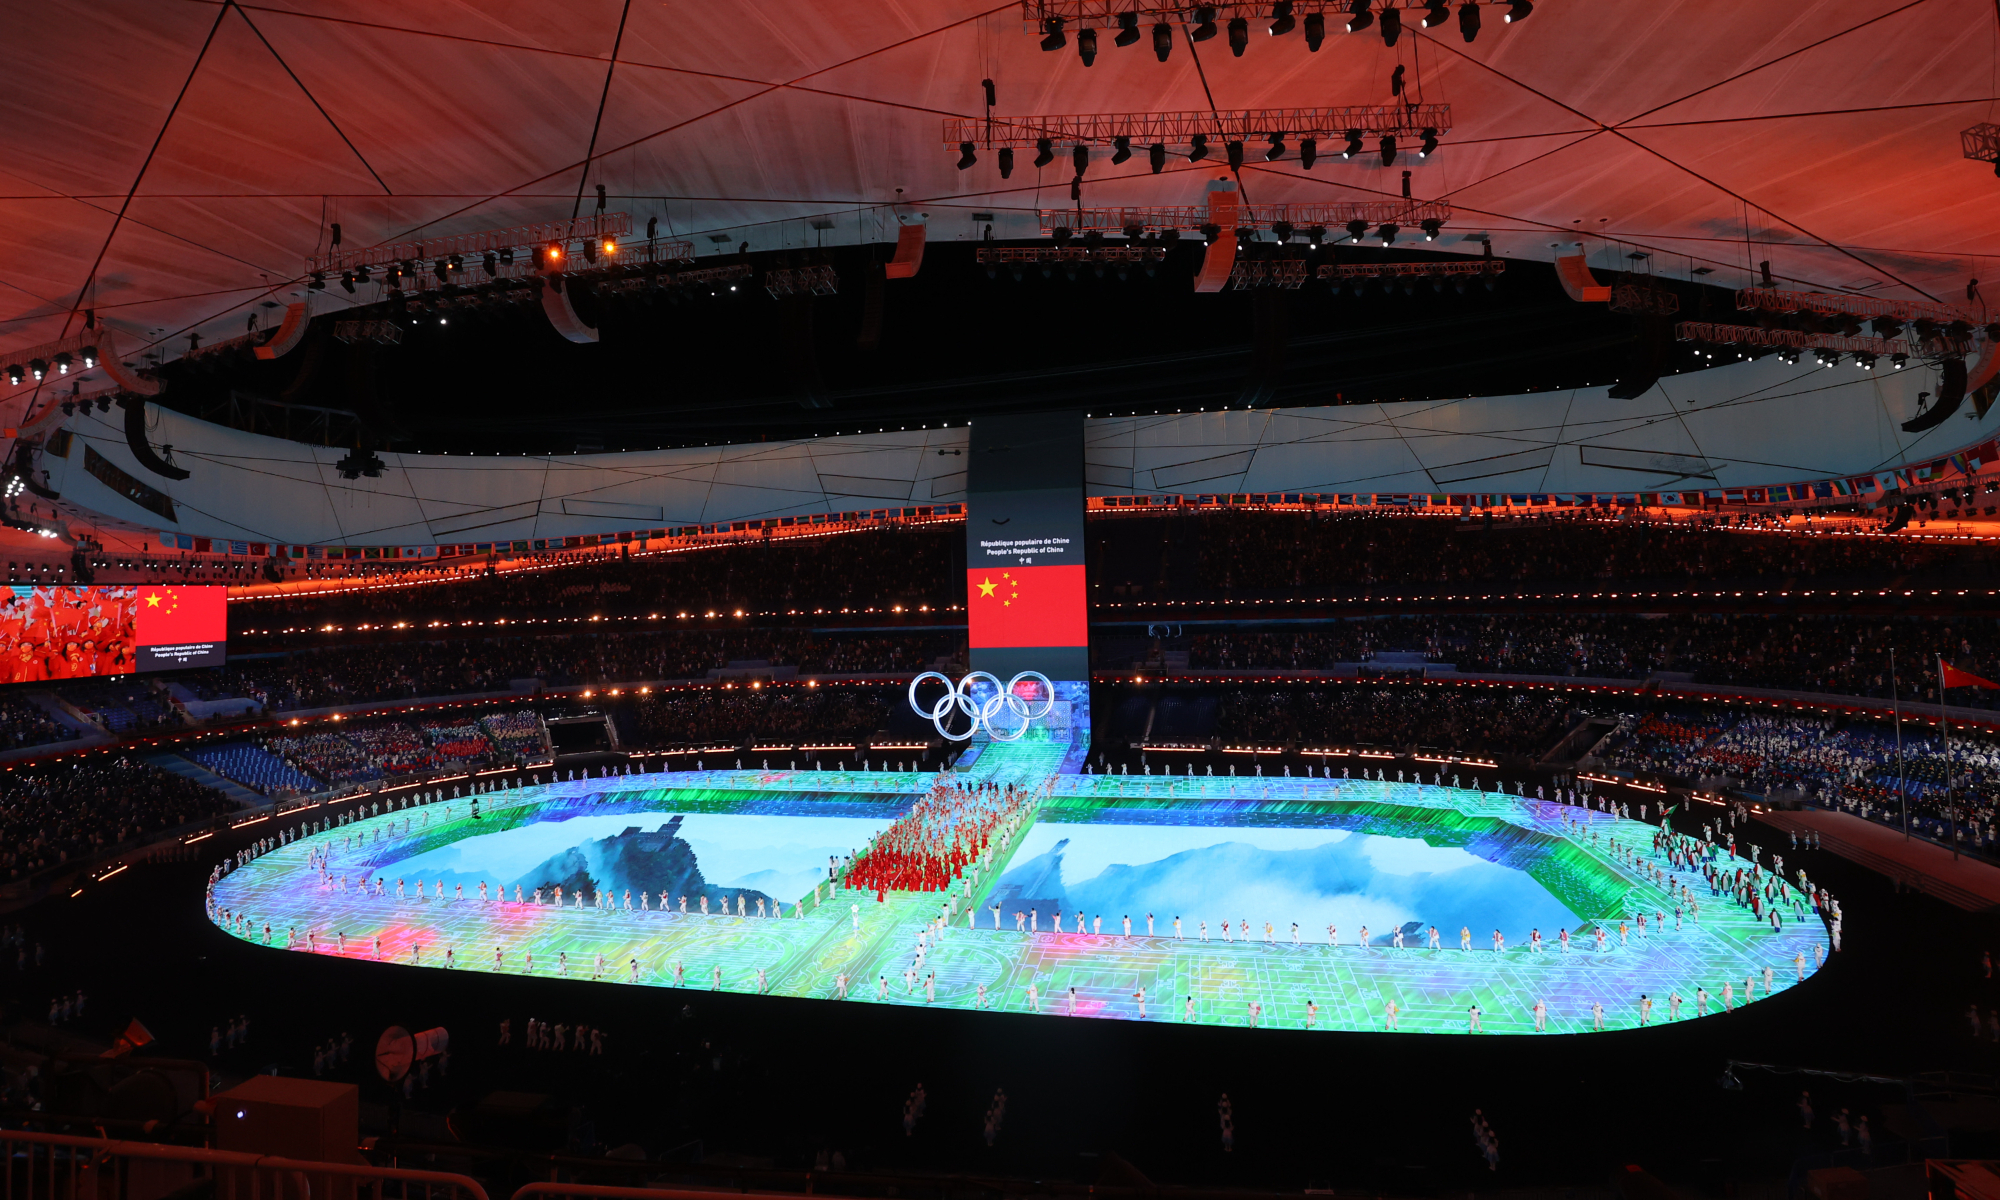 Beijing 2022 releases Legacy Report - Olympic News